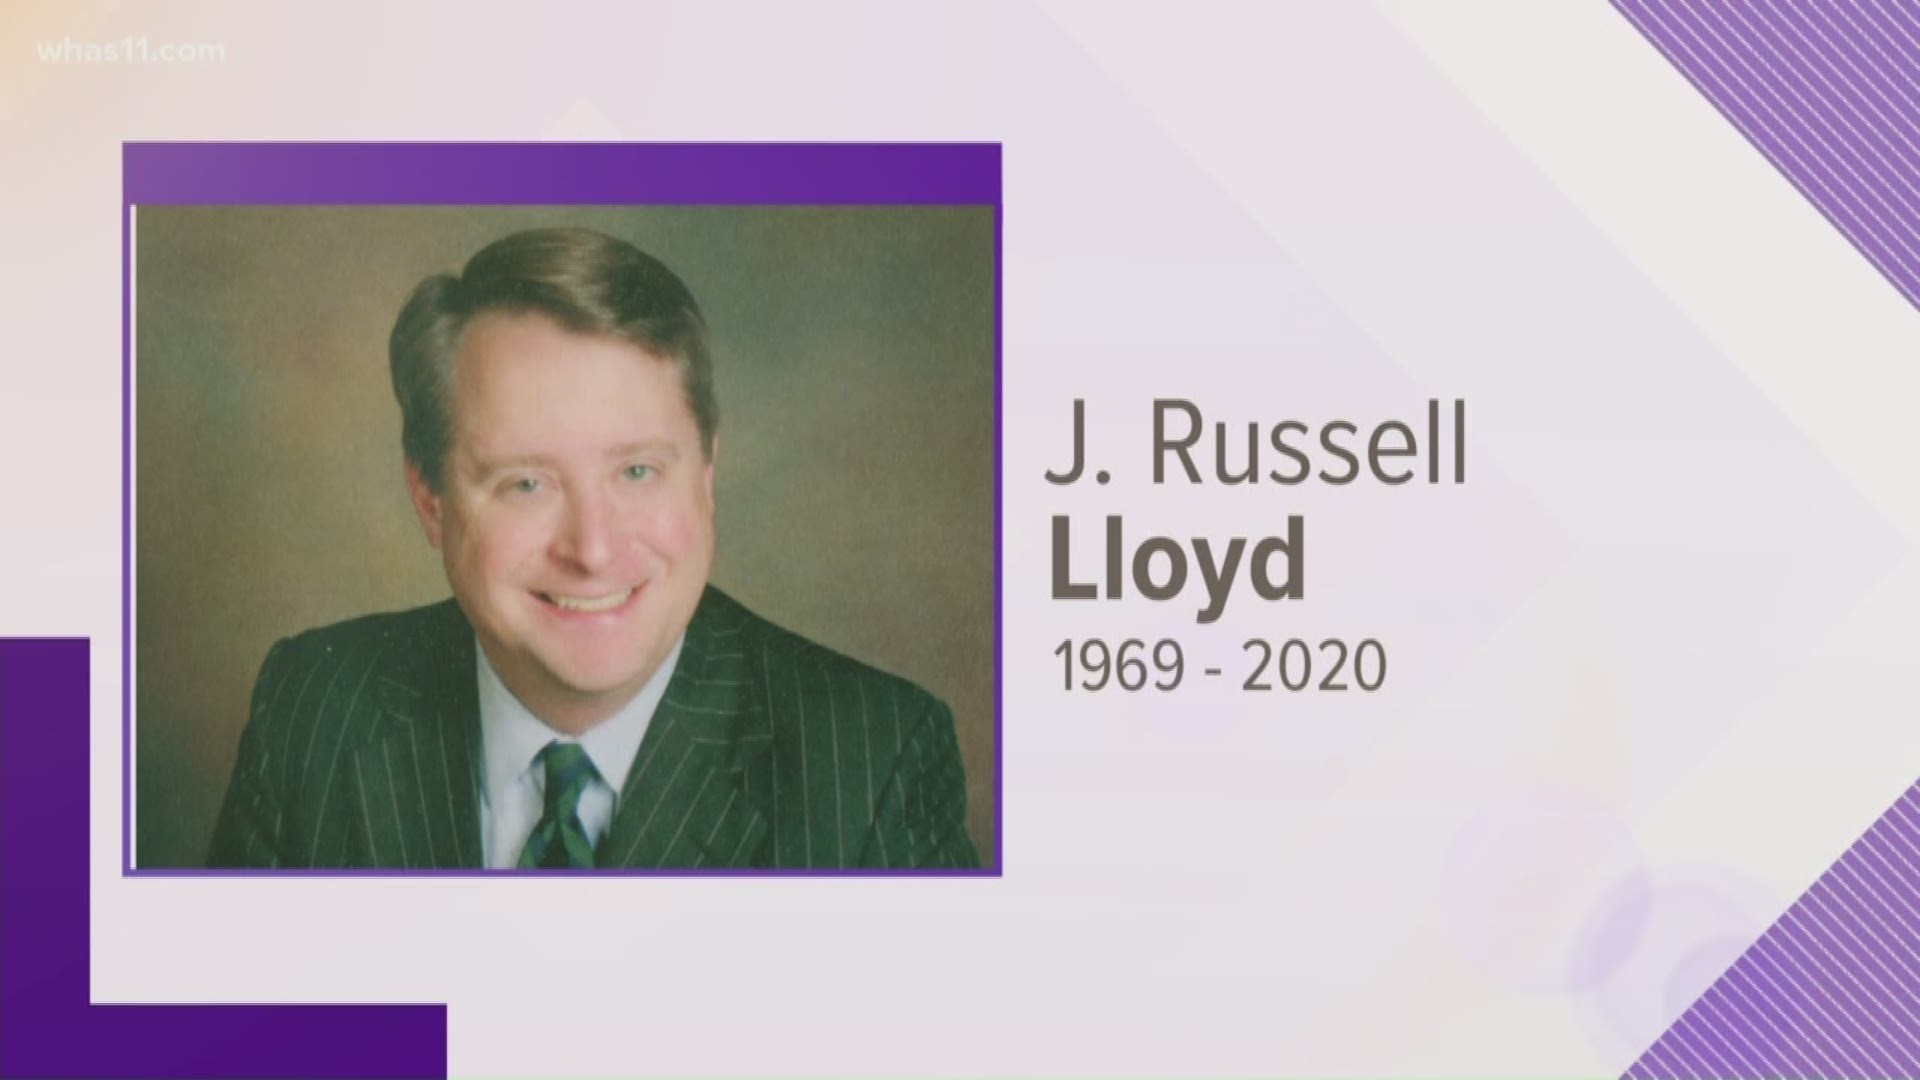 Officials say J. Russell Lloyd passed away Sunday morning. He fought tirelessly for voter rights.